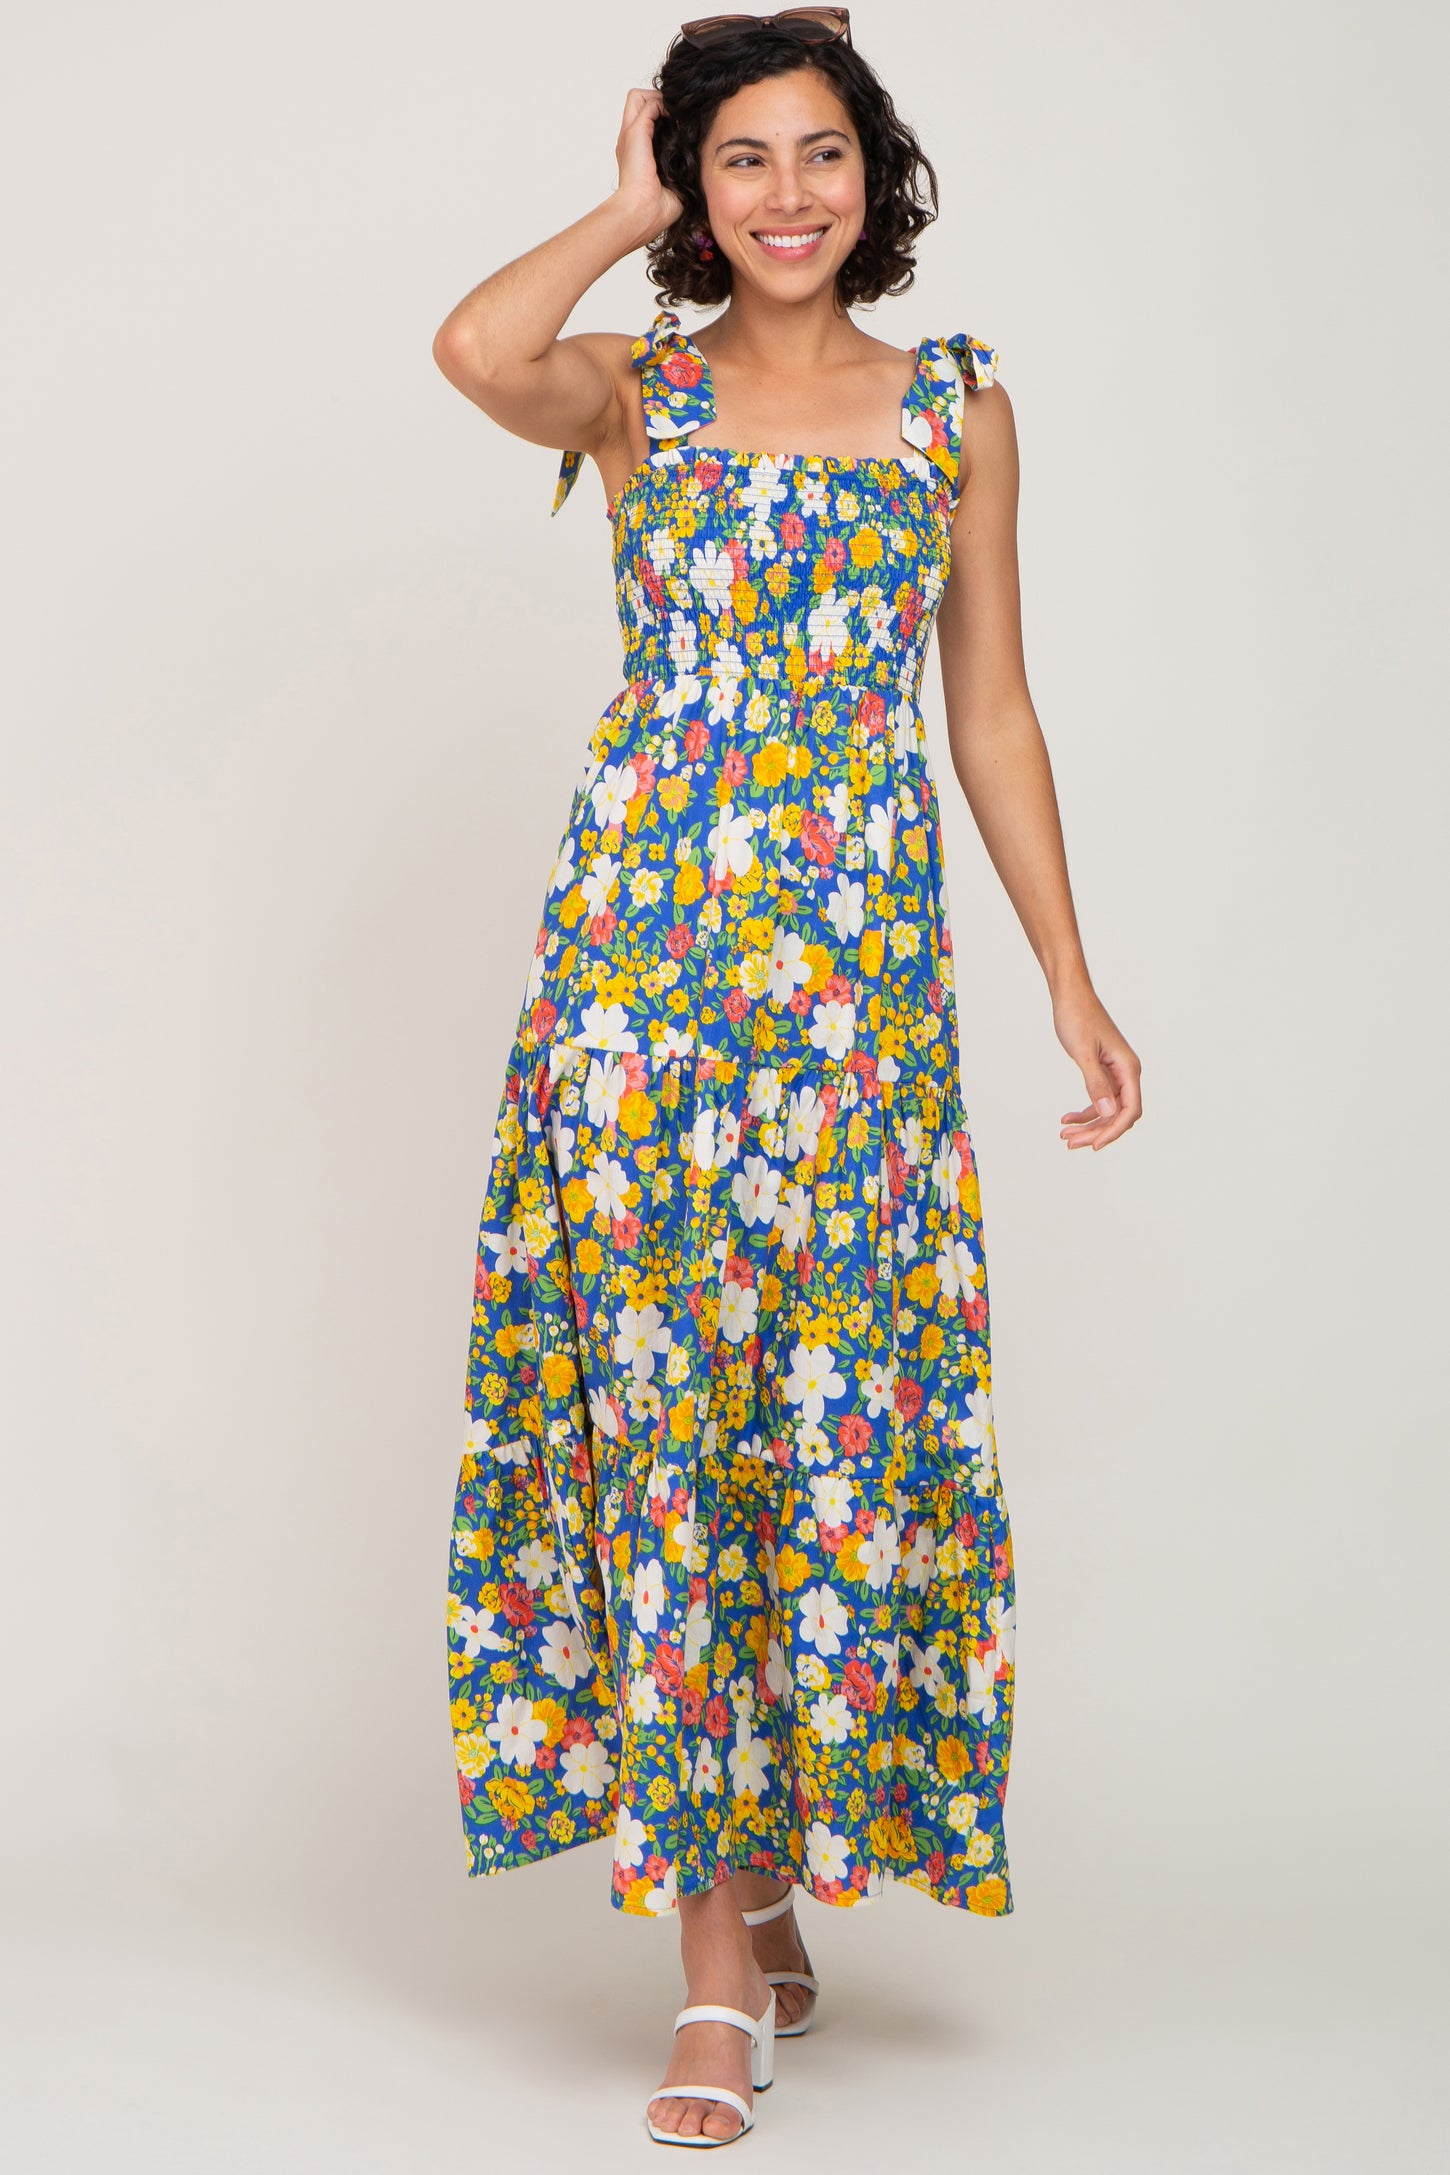 Blue Multi-Color Floral Sleeveless Smocked Tiered Maternity Maxi Dress